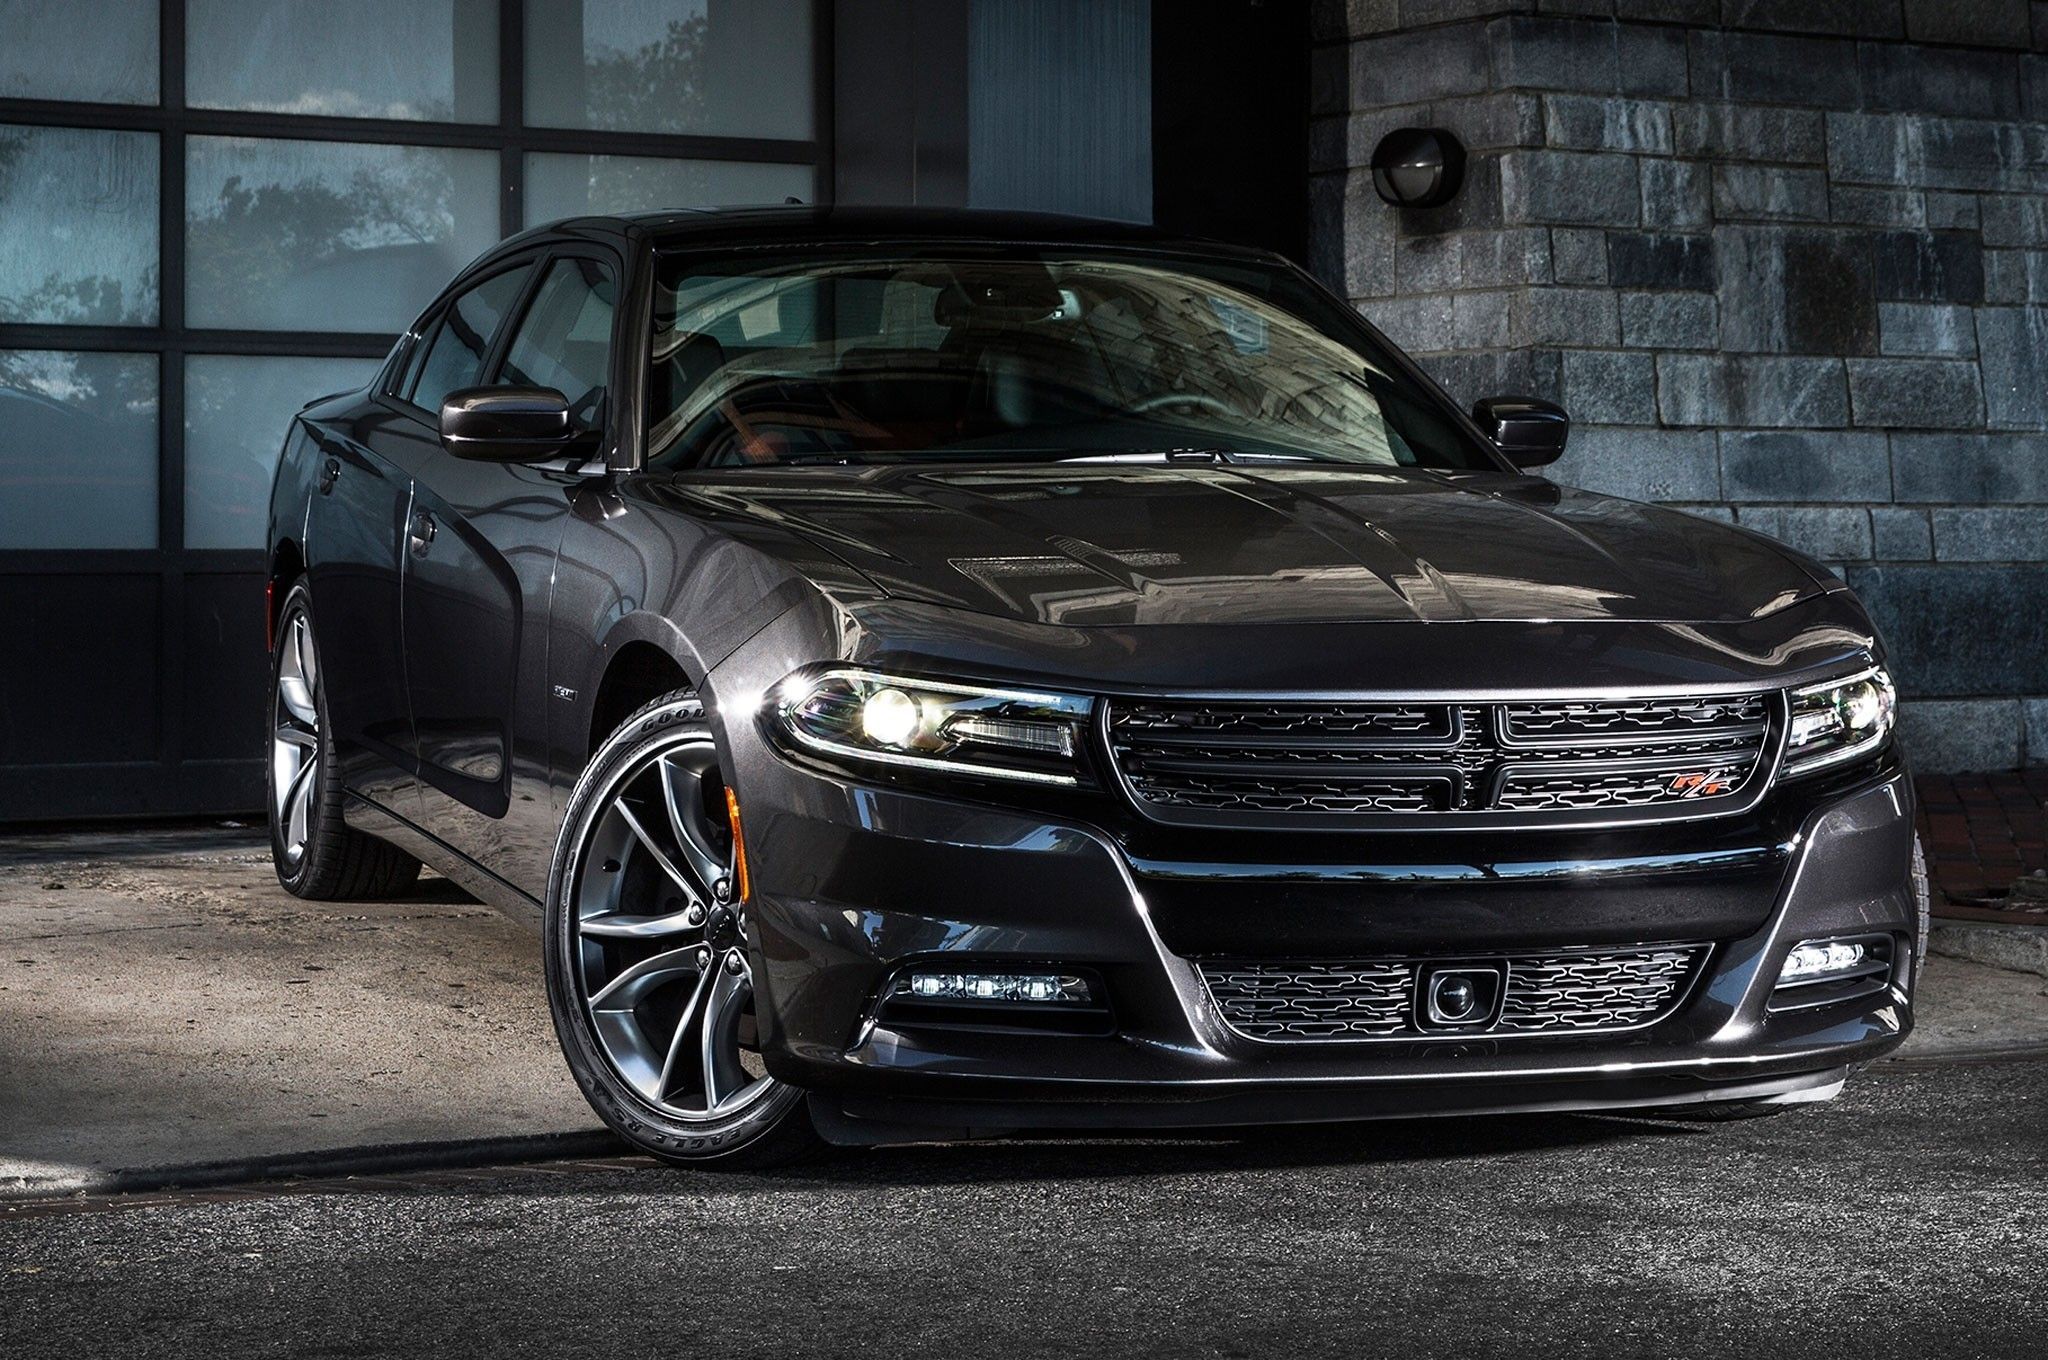 Dodge Charger Blacktop Wallpapers